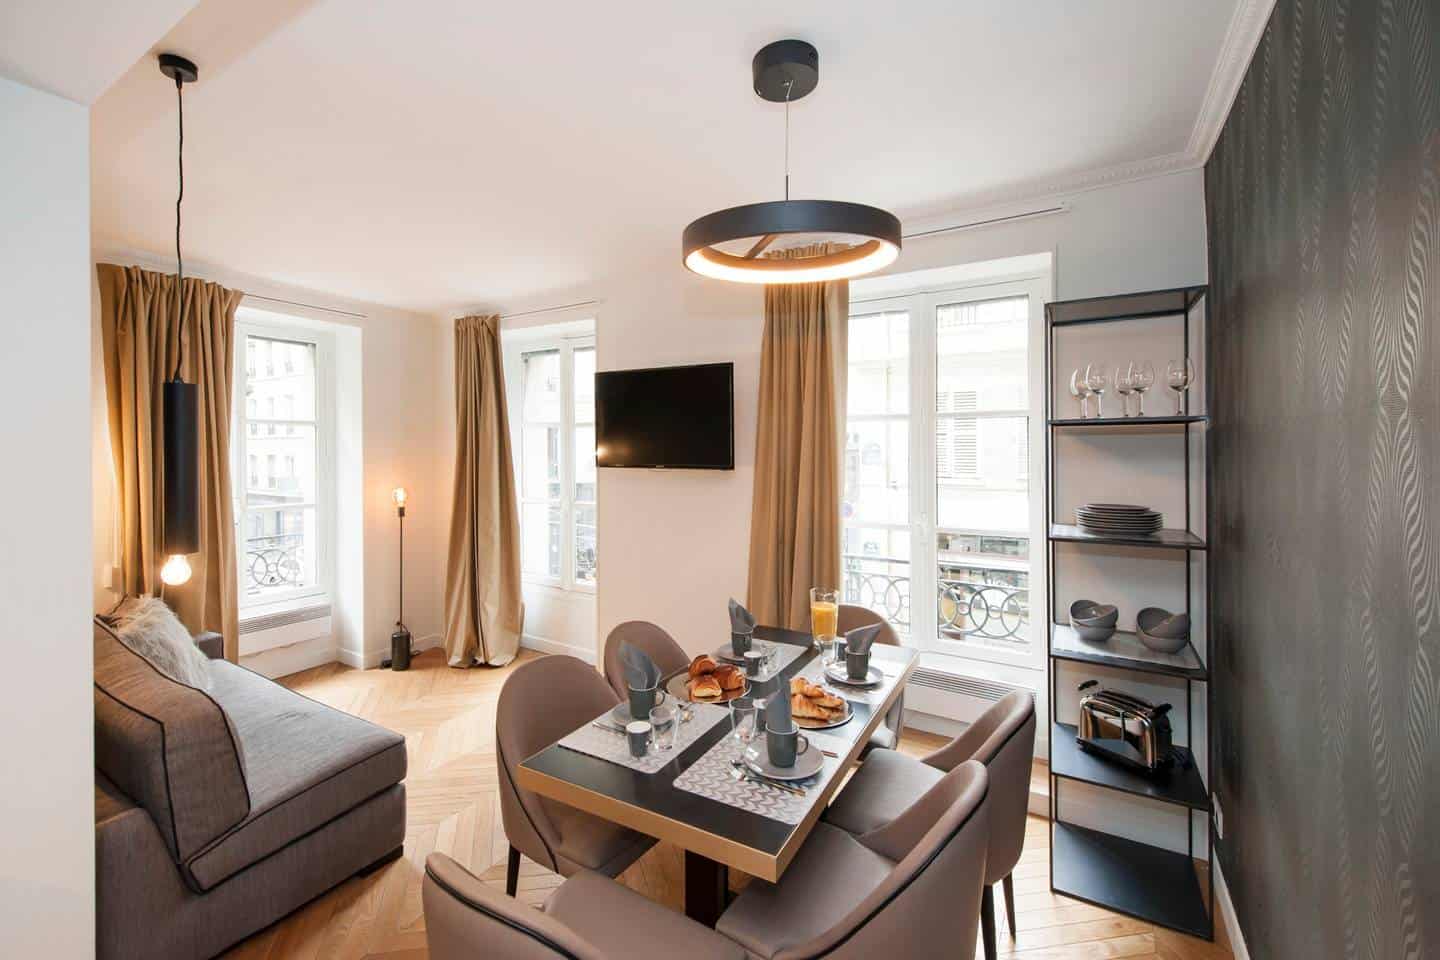 Wow! This Airbnb Paris listing near Luxembourg Gardens is dreamy. You have to see the pictures!